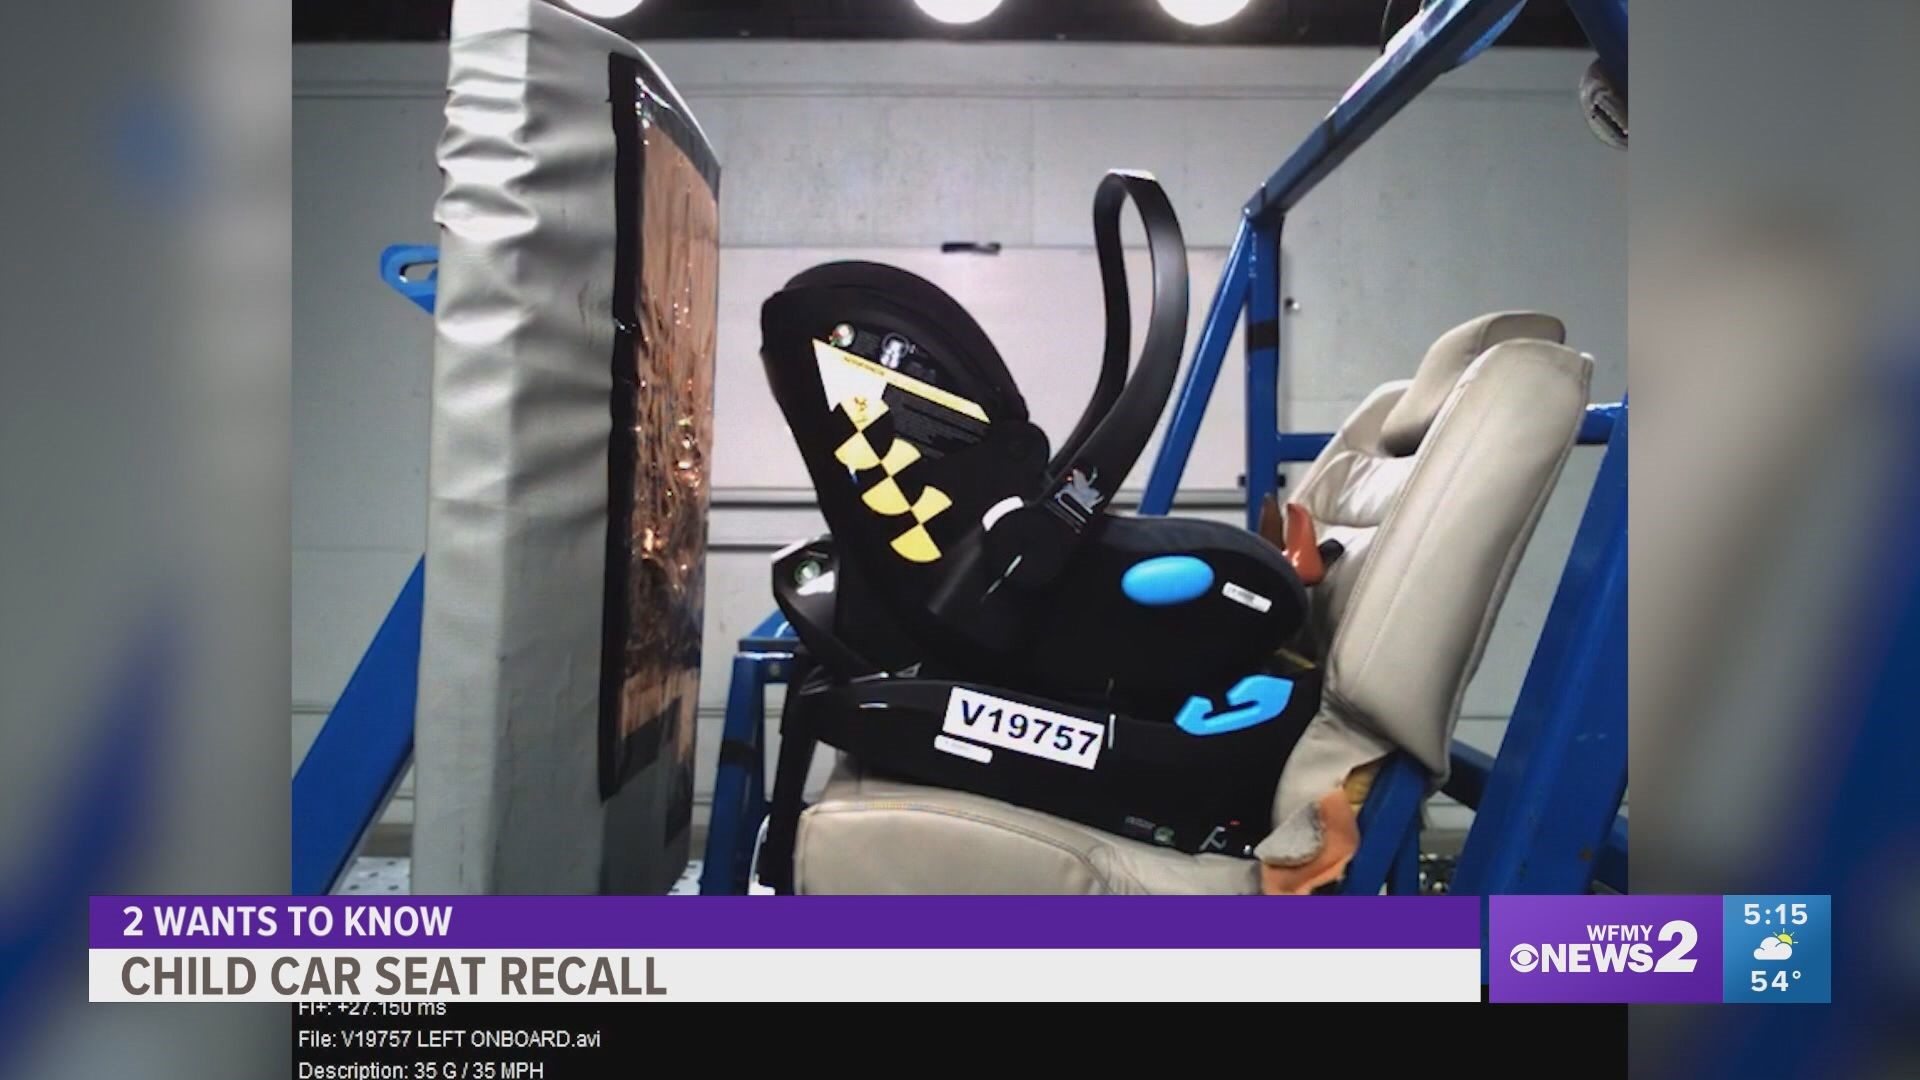 The recall involves six different brand names of car seats. Consumer Reports shares what parents need to know to keep kids safe.